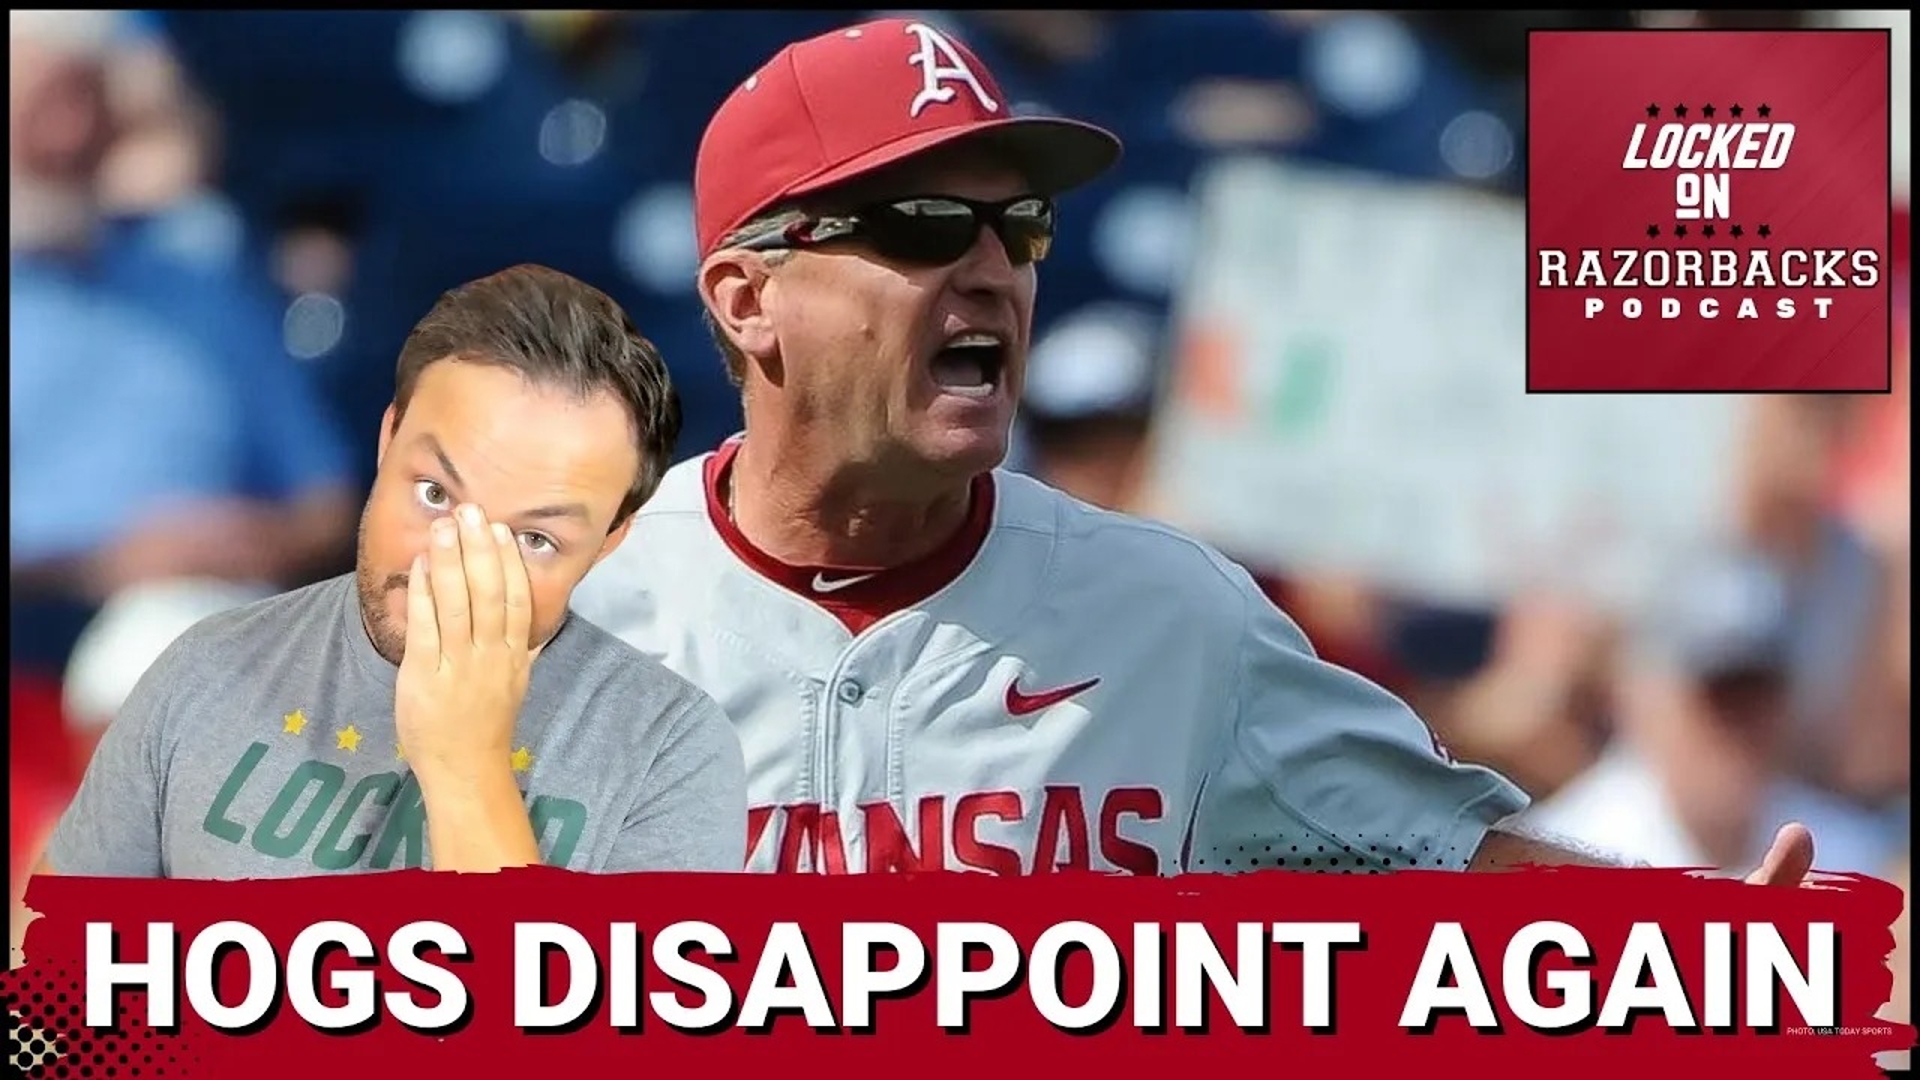 Razorback Baseball had their season end in a disappointing fashion once again as they went 1-2 in the Fayetteville Regional.